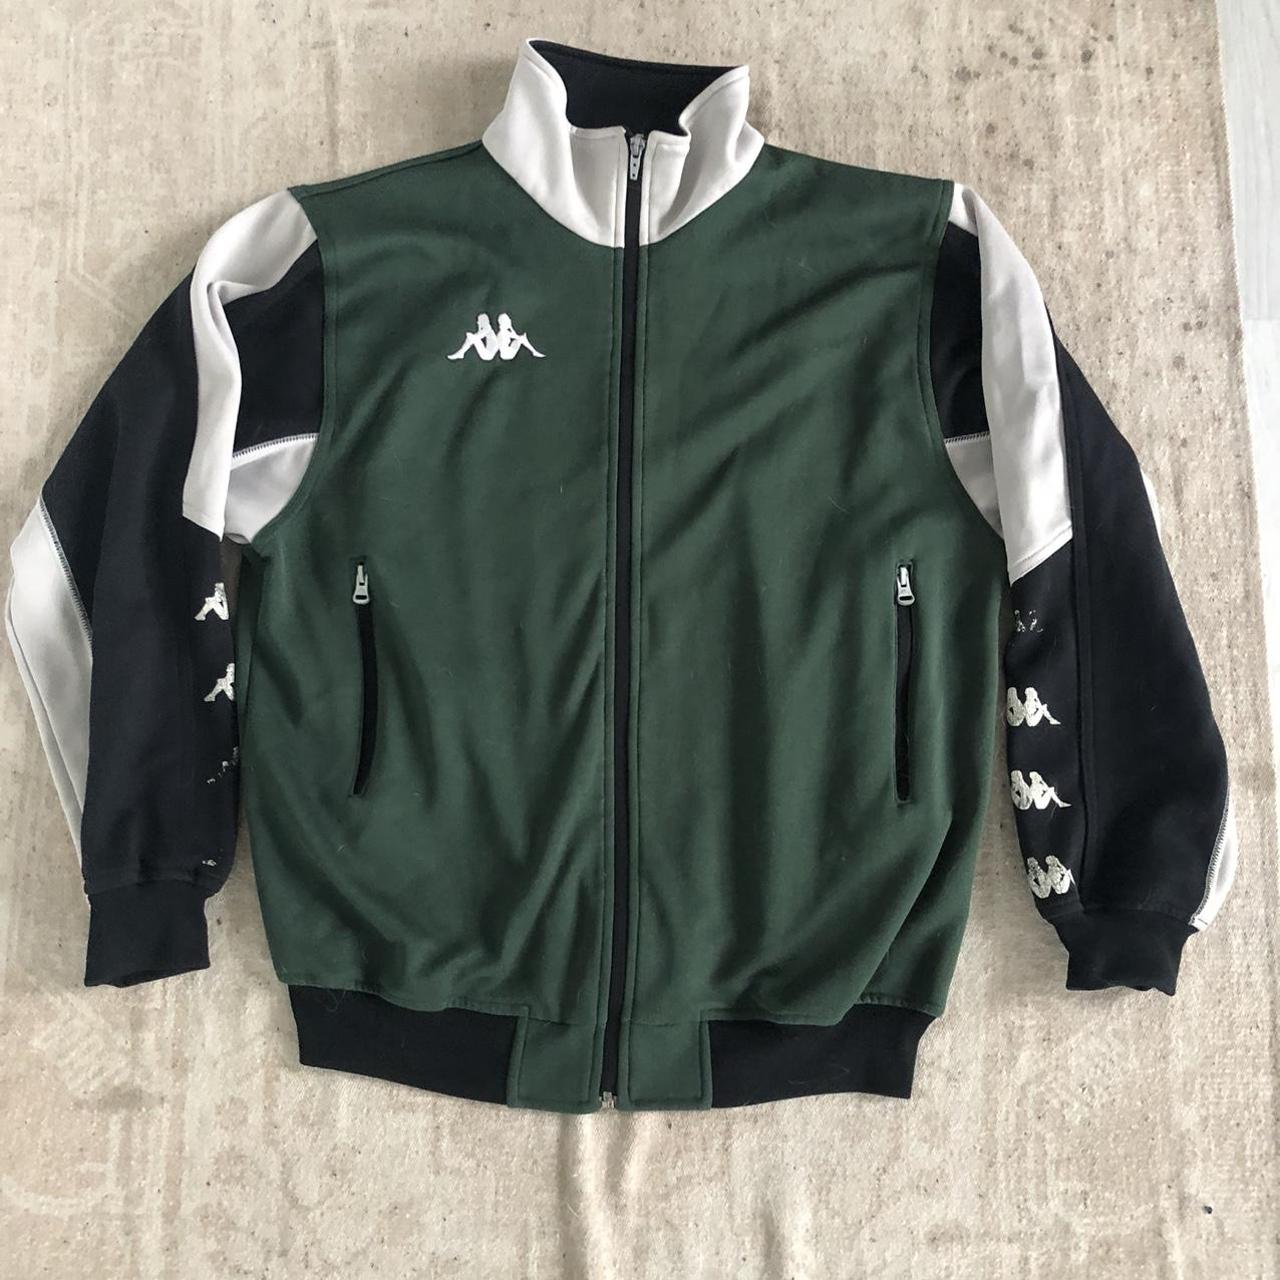 Small kappa zip up , soft and nice just too small - Depop